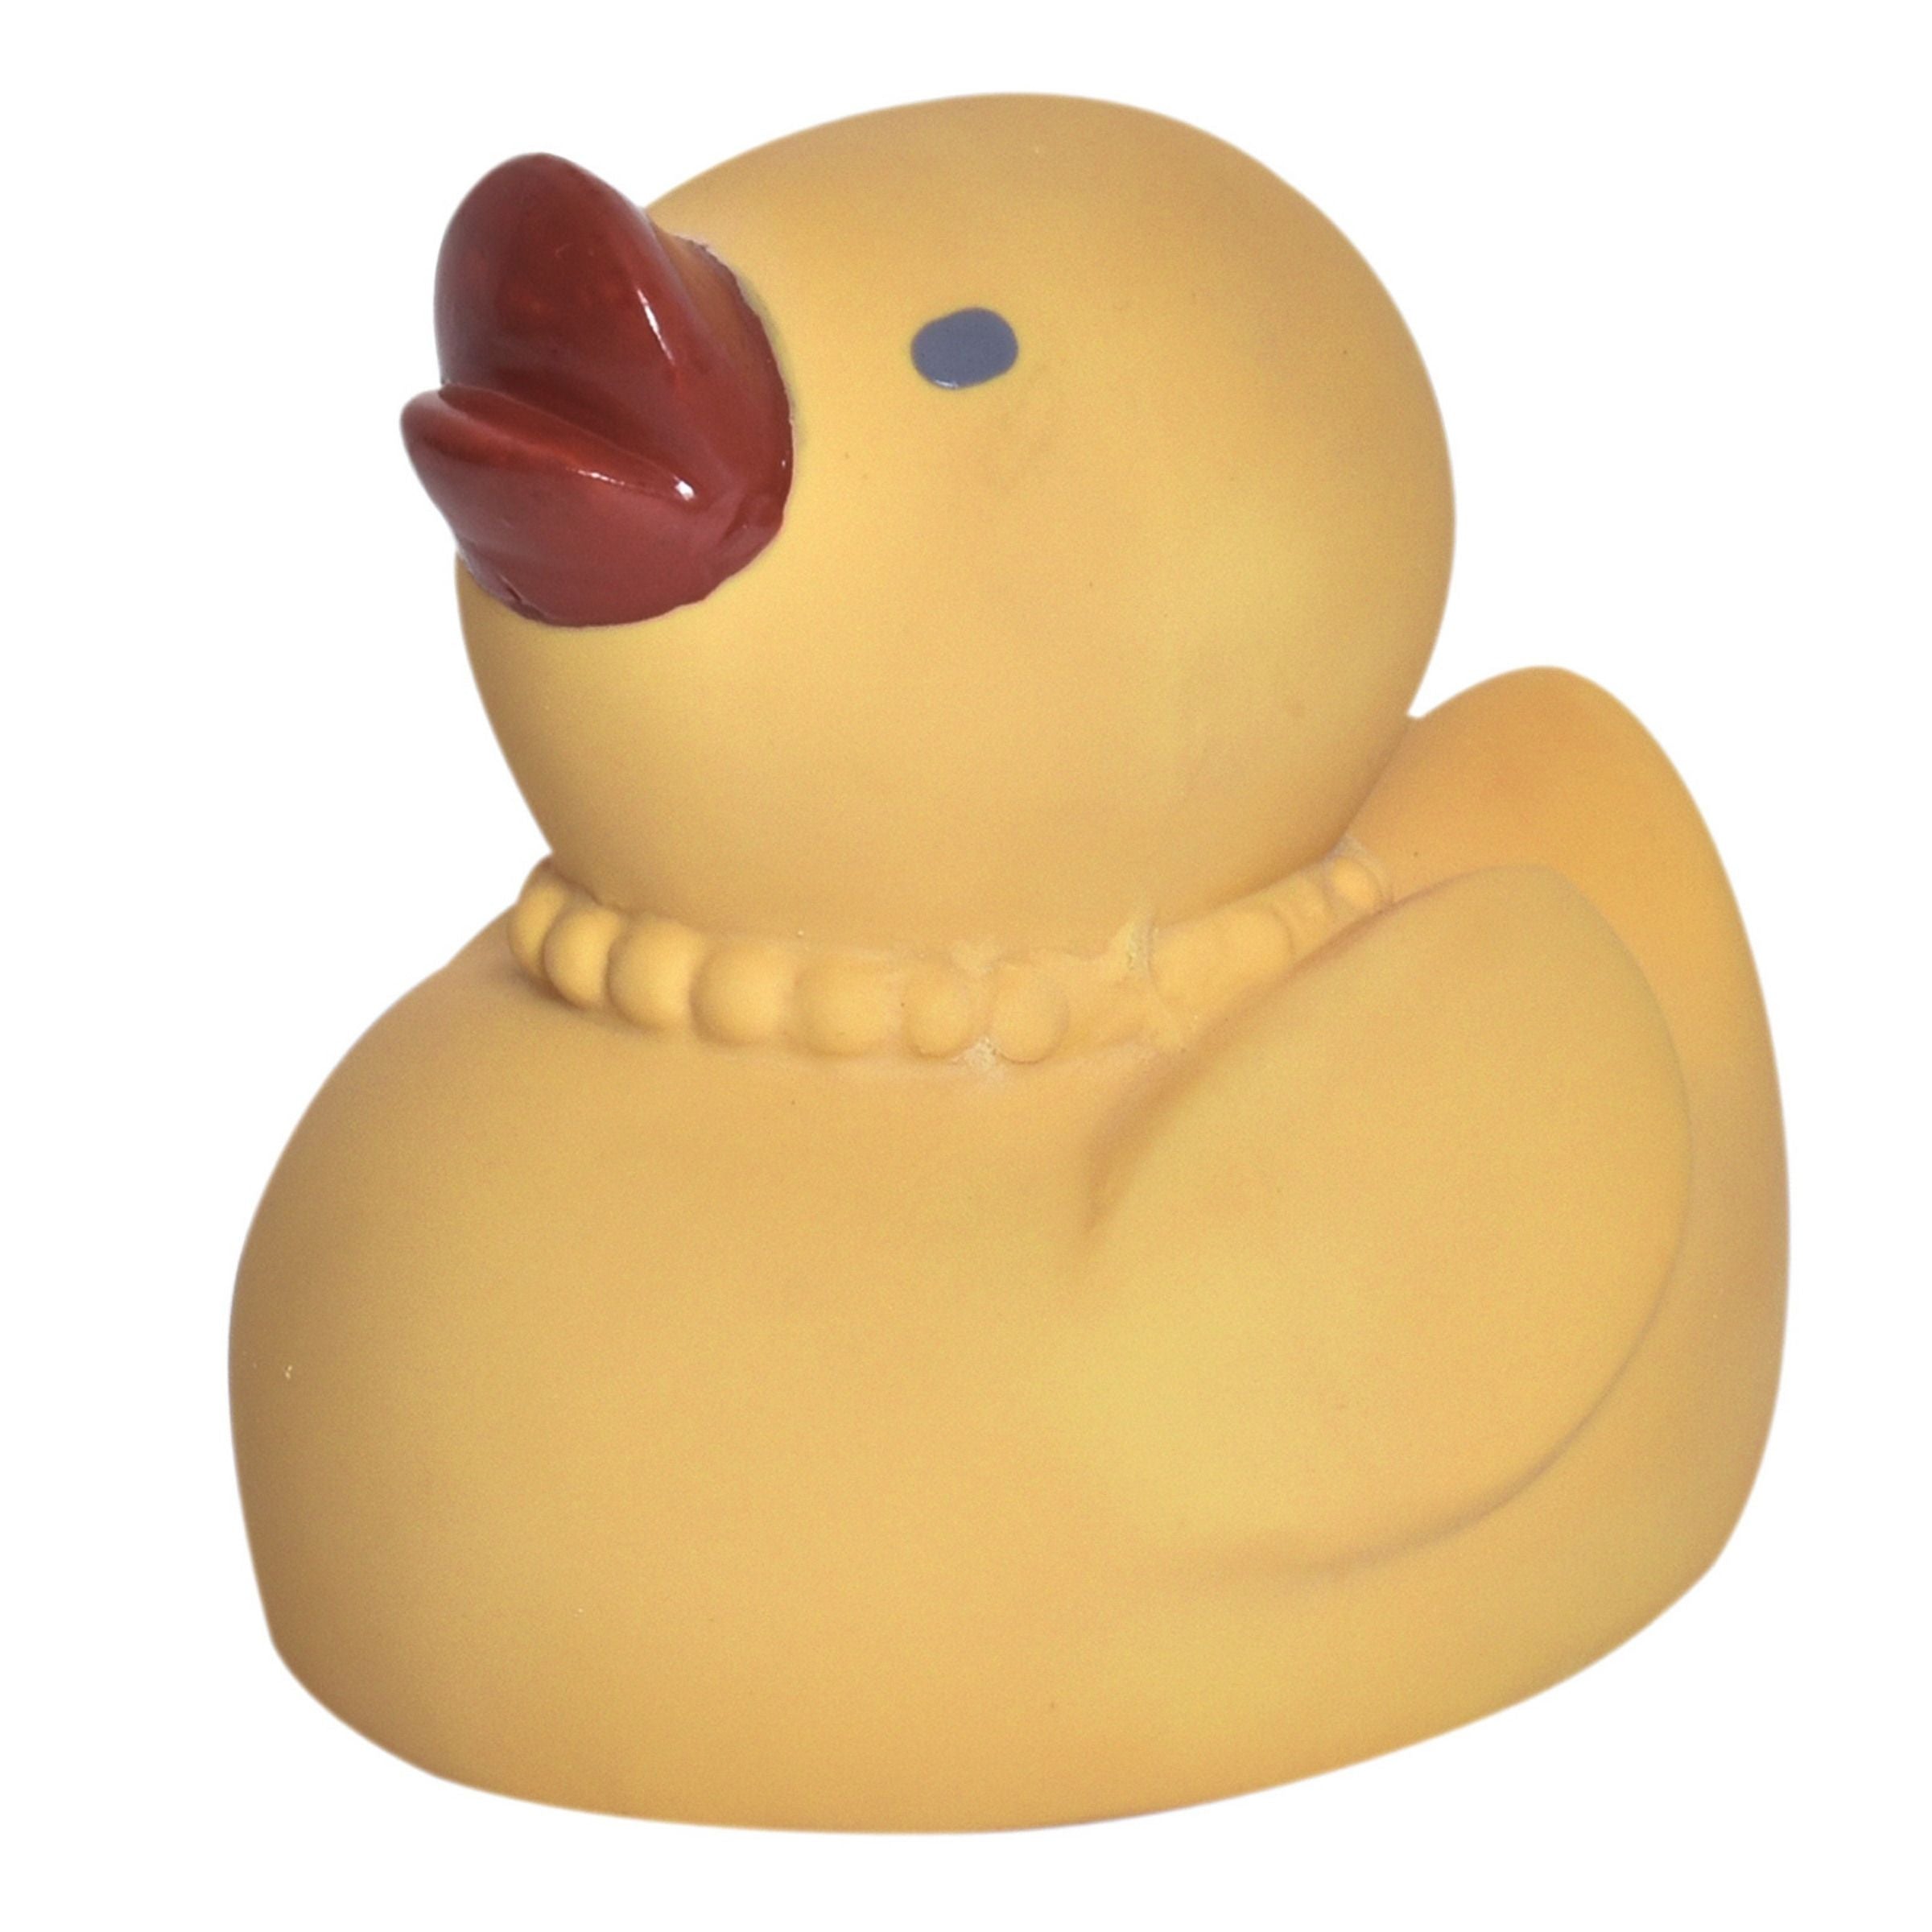 Yelllow rubber duck with a pearl neckalce and lip stick.